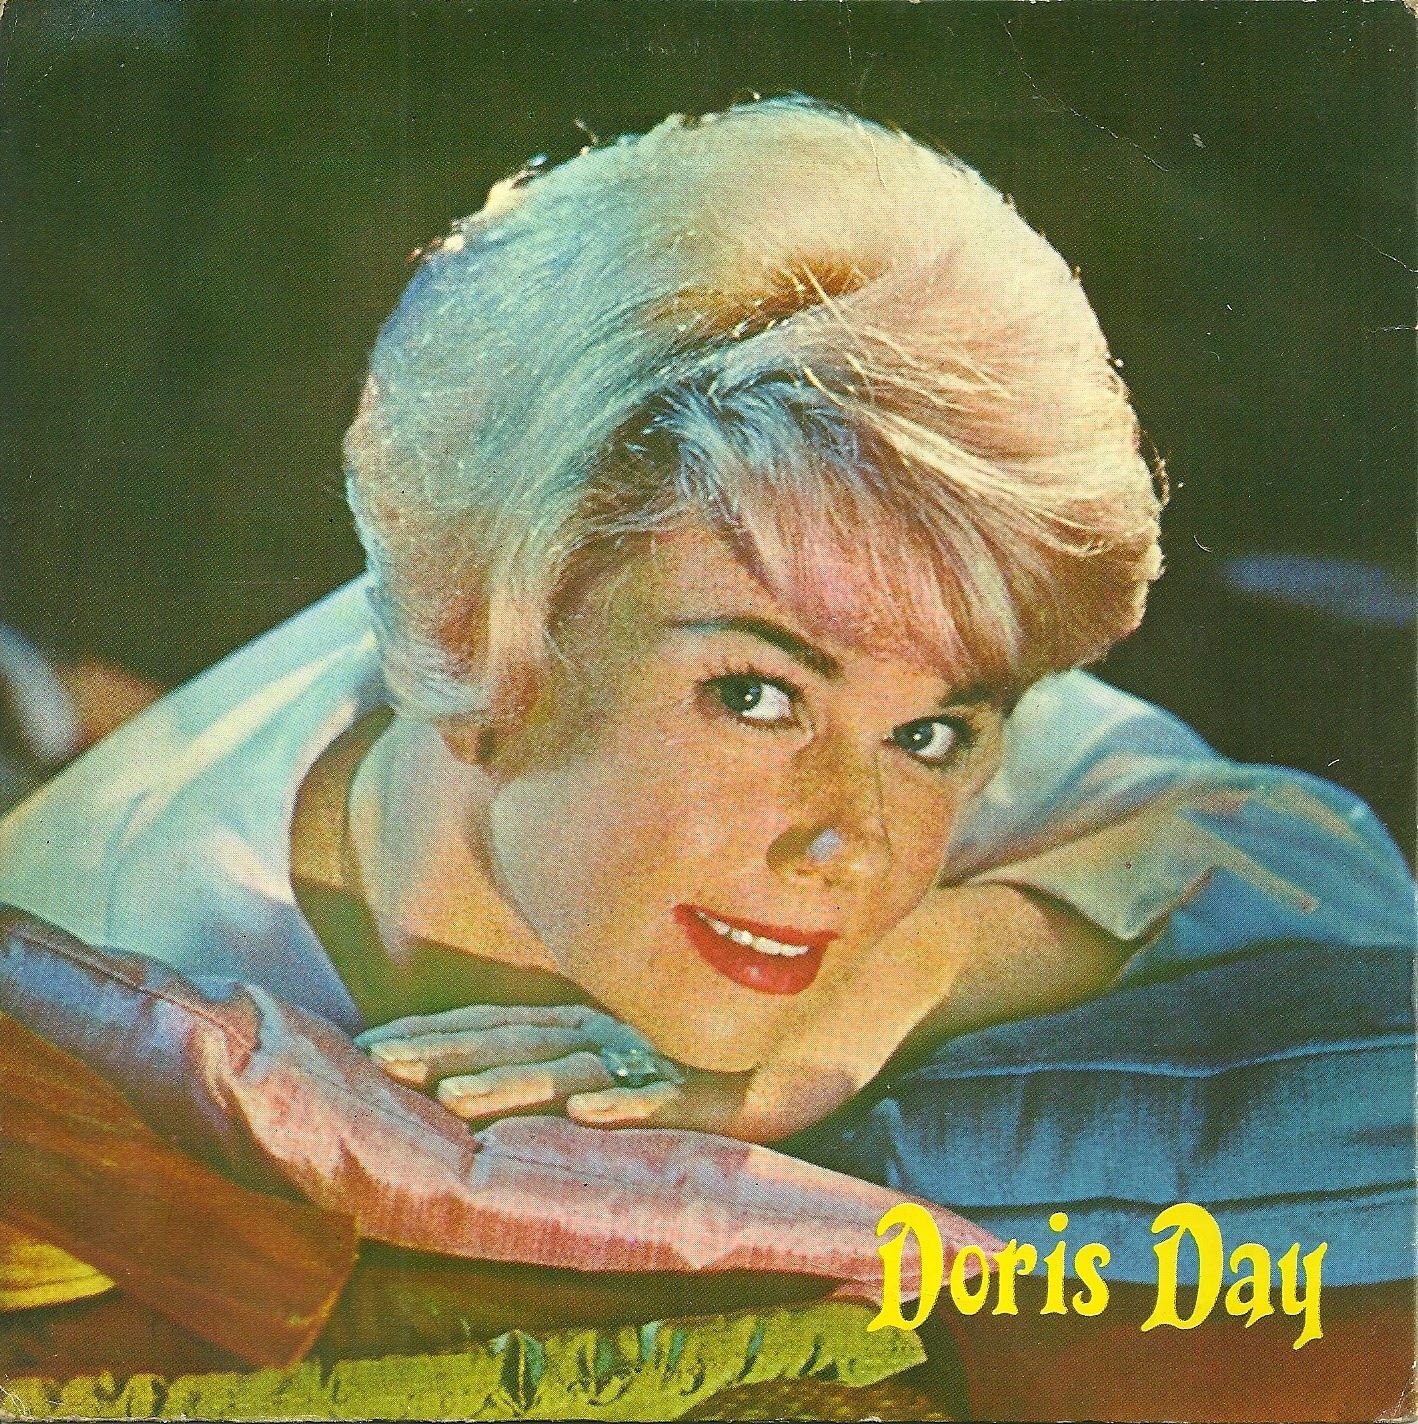 Re: 2017 Doris Day pictures.